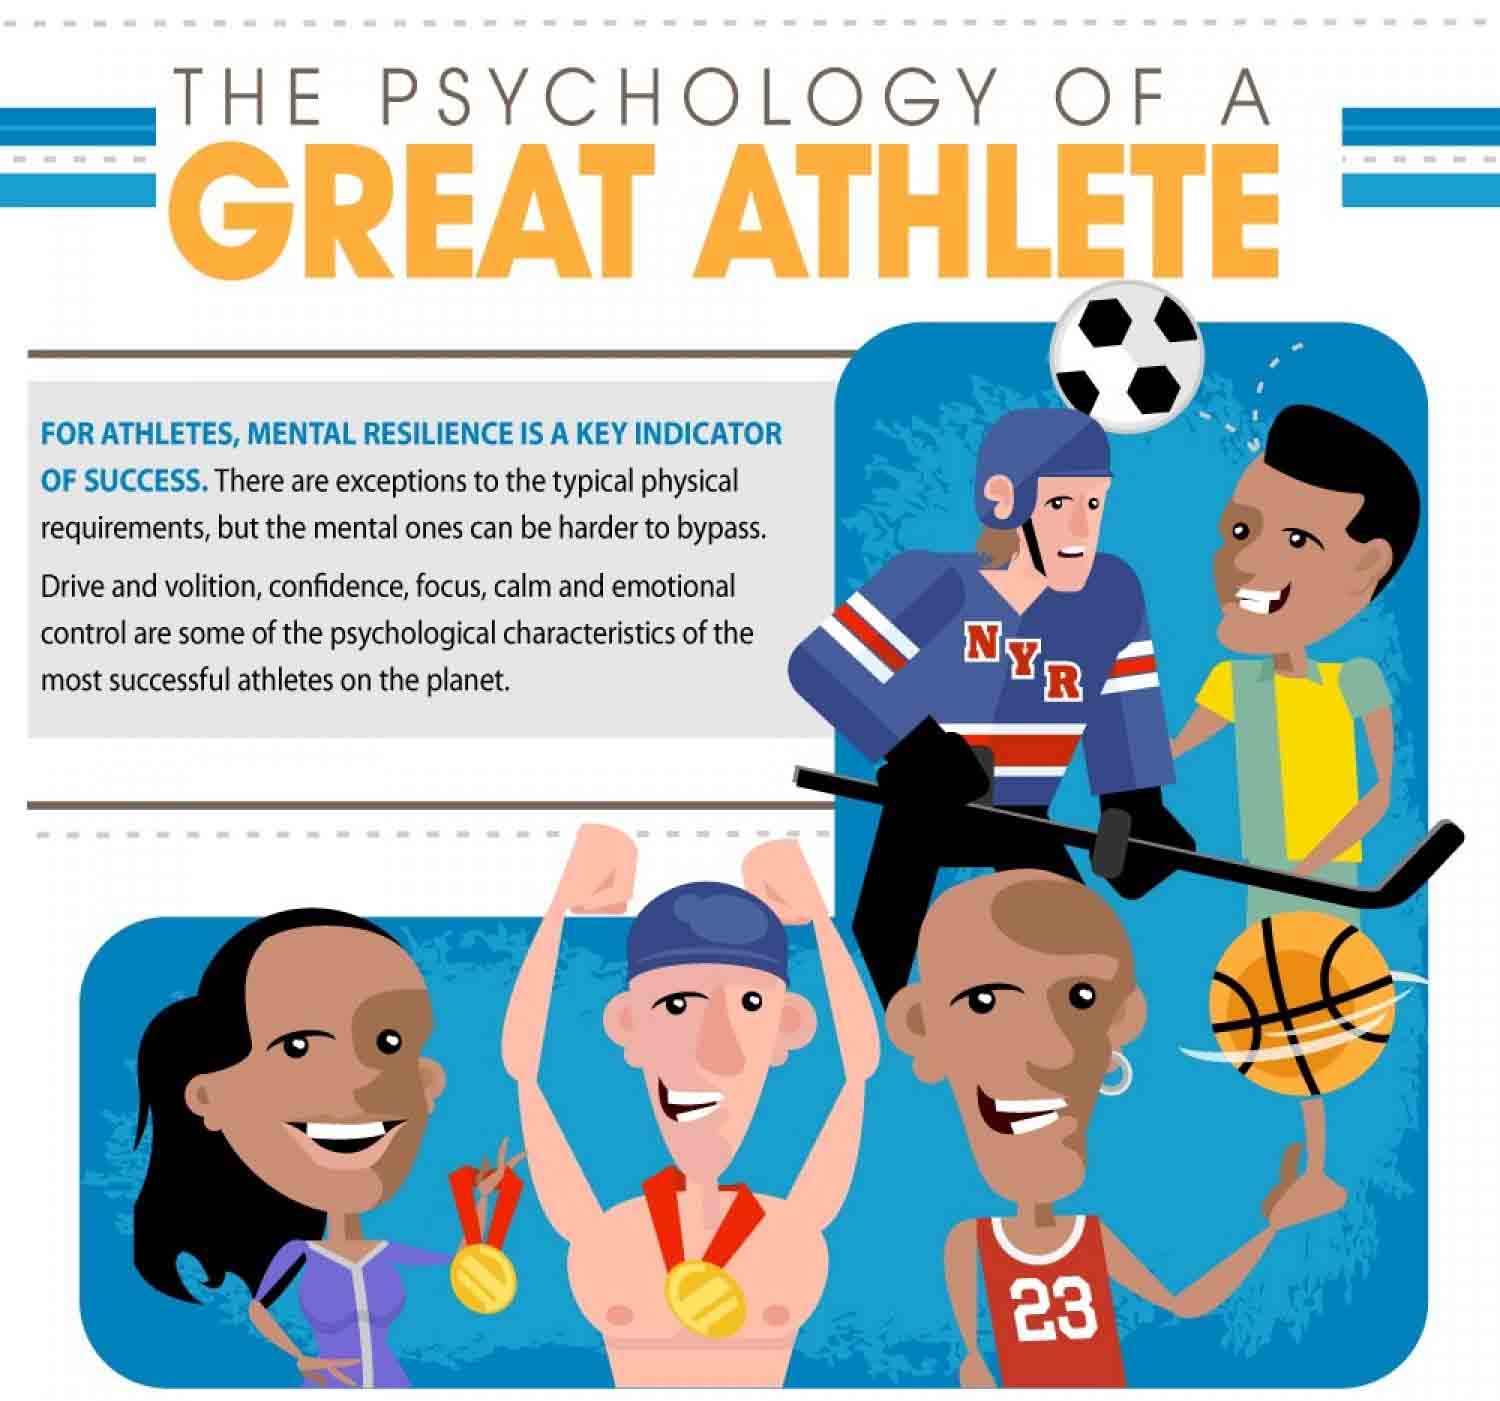 The Psychology of a Great Athlete